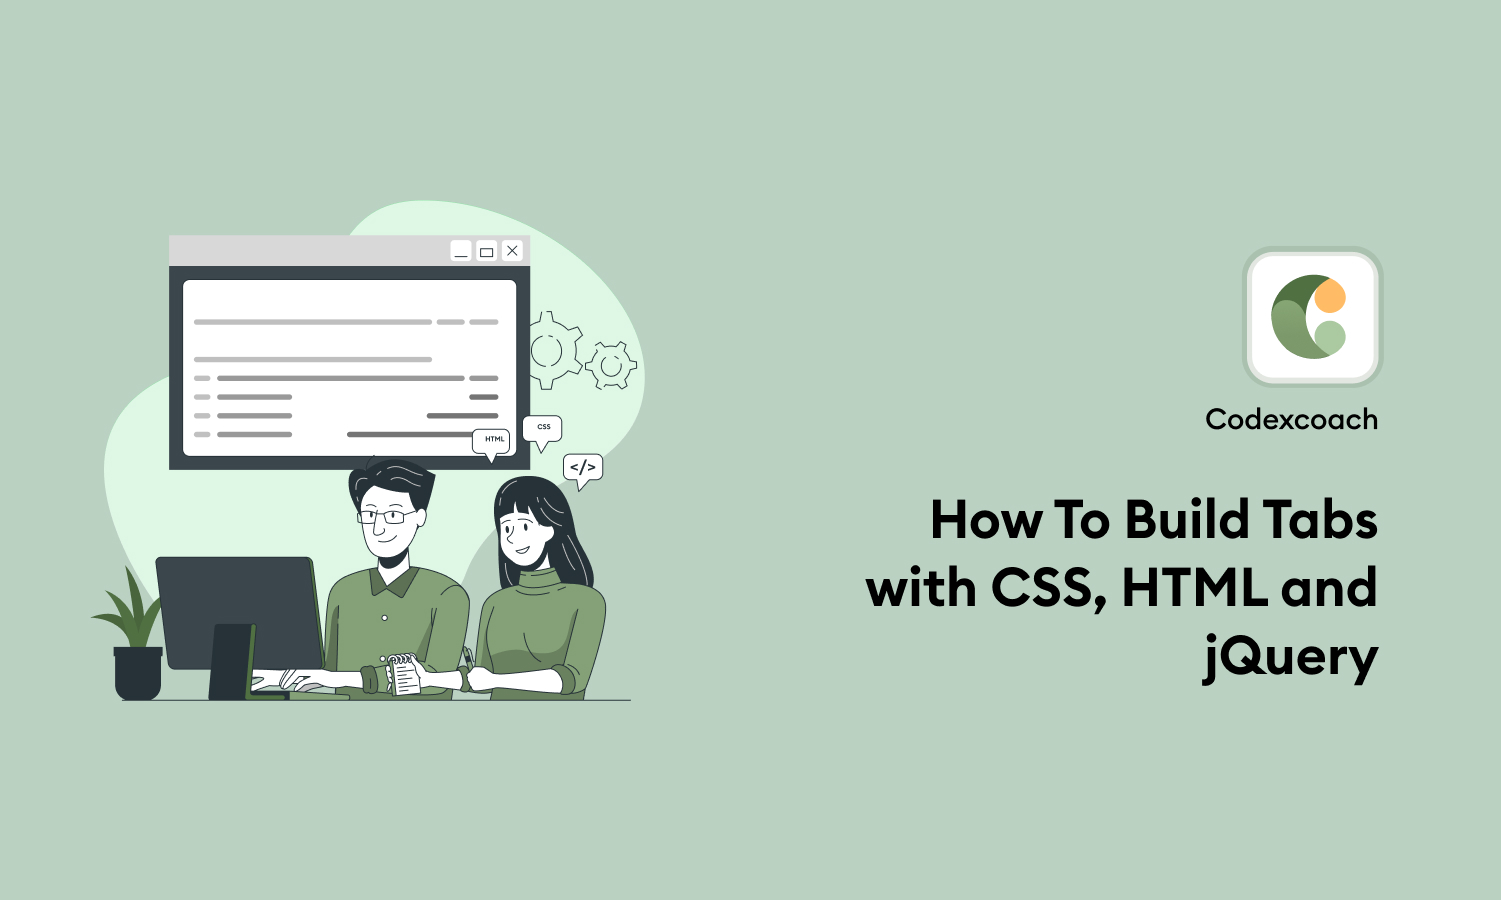 How To Build Tabs with CSS, HTML and jQuery